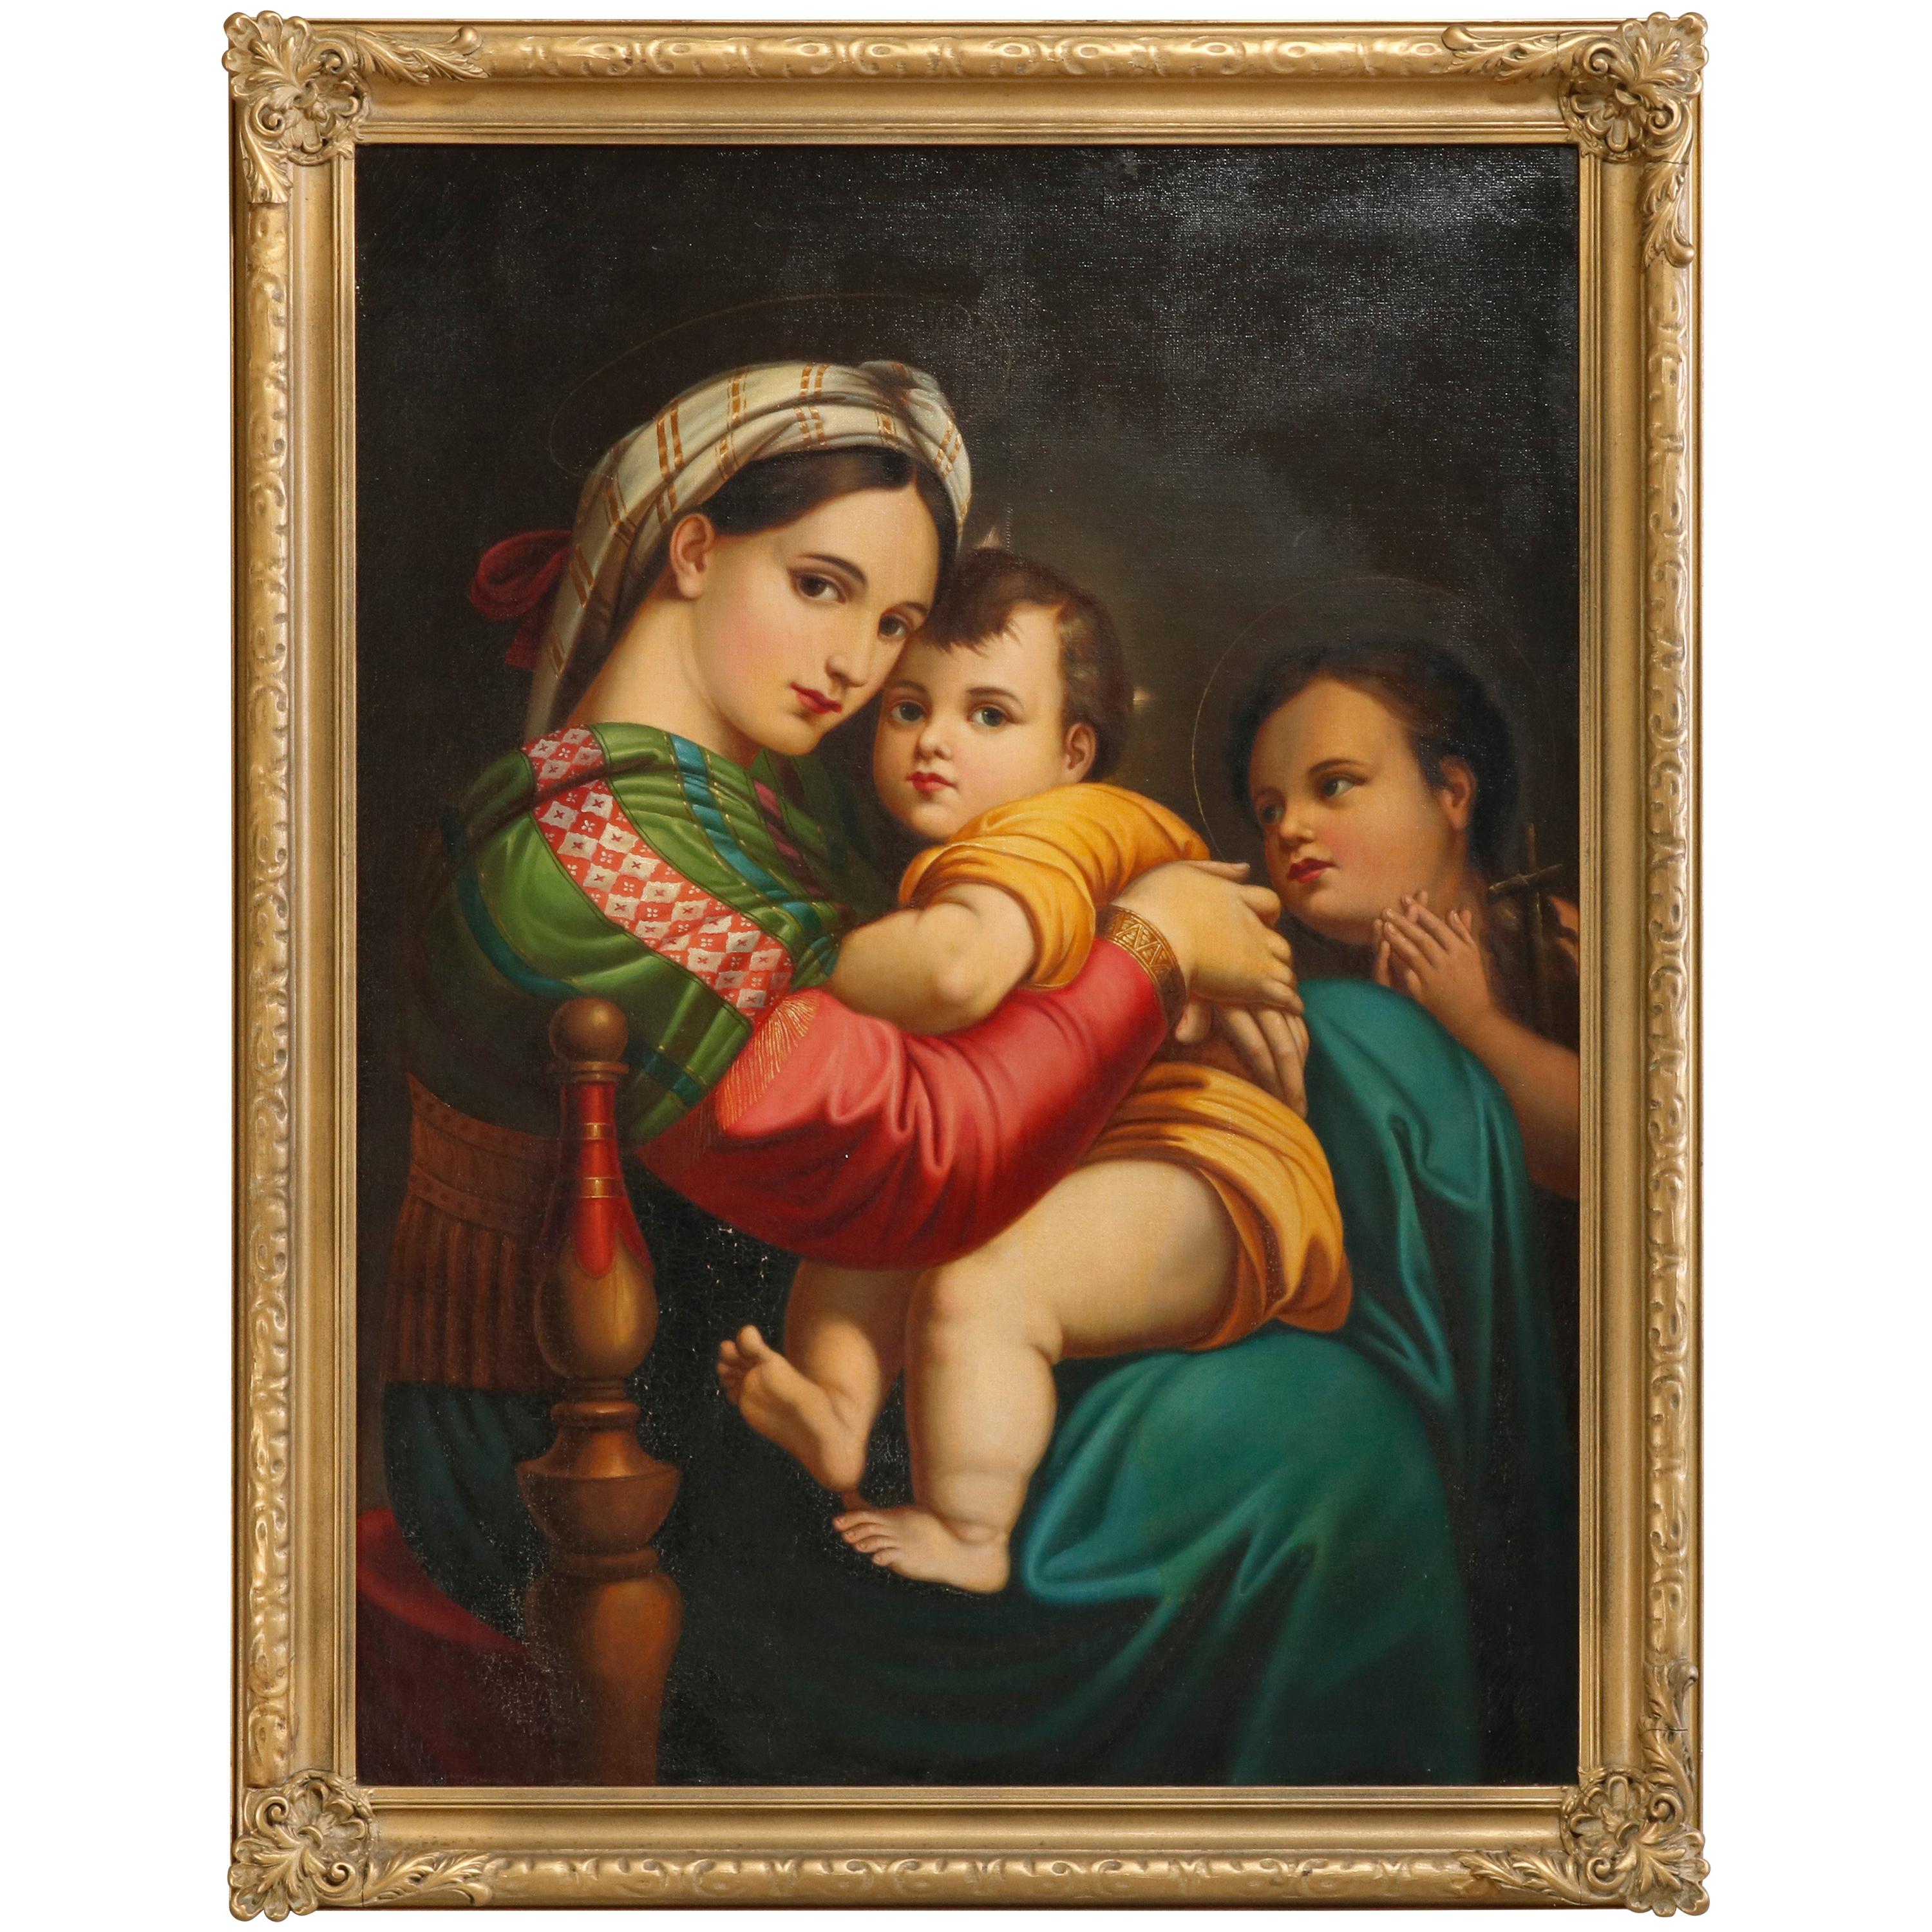 Oil Painting Old Master Copy after Raphael's Madonna Della Sedia, 19th Century